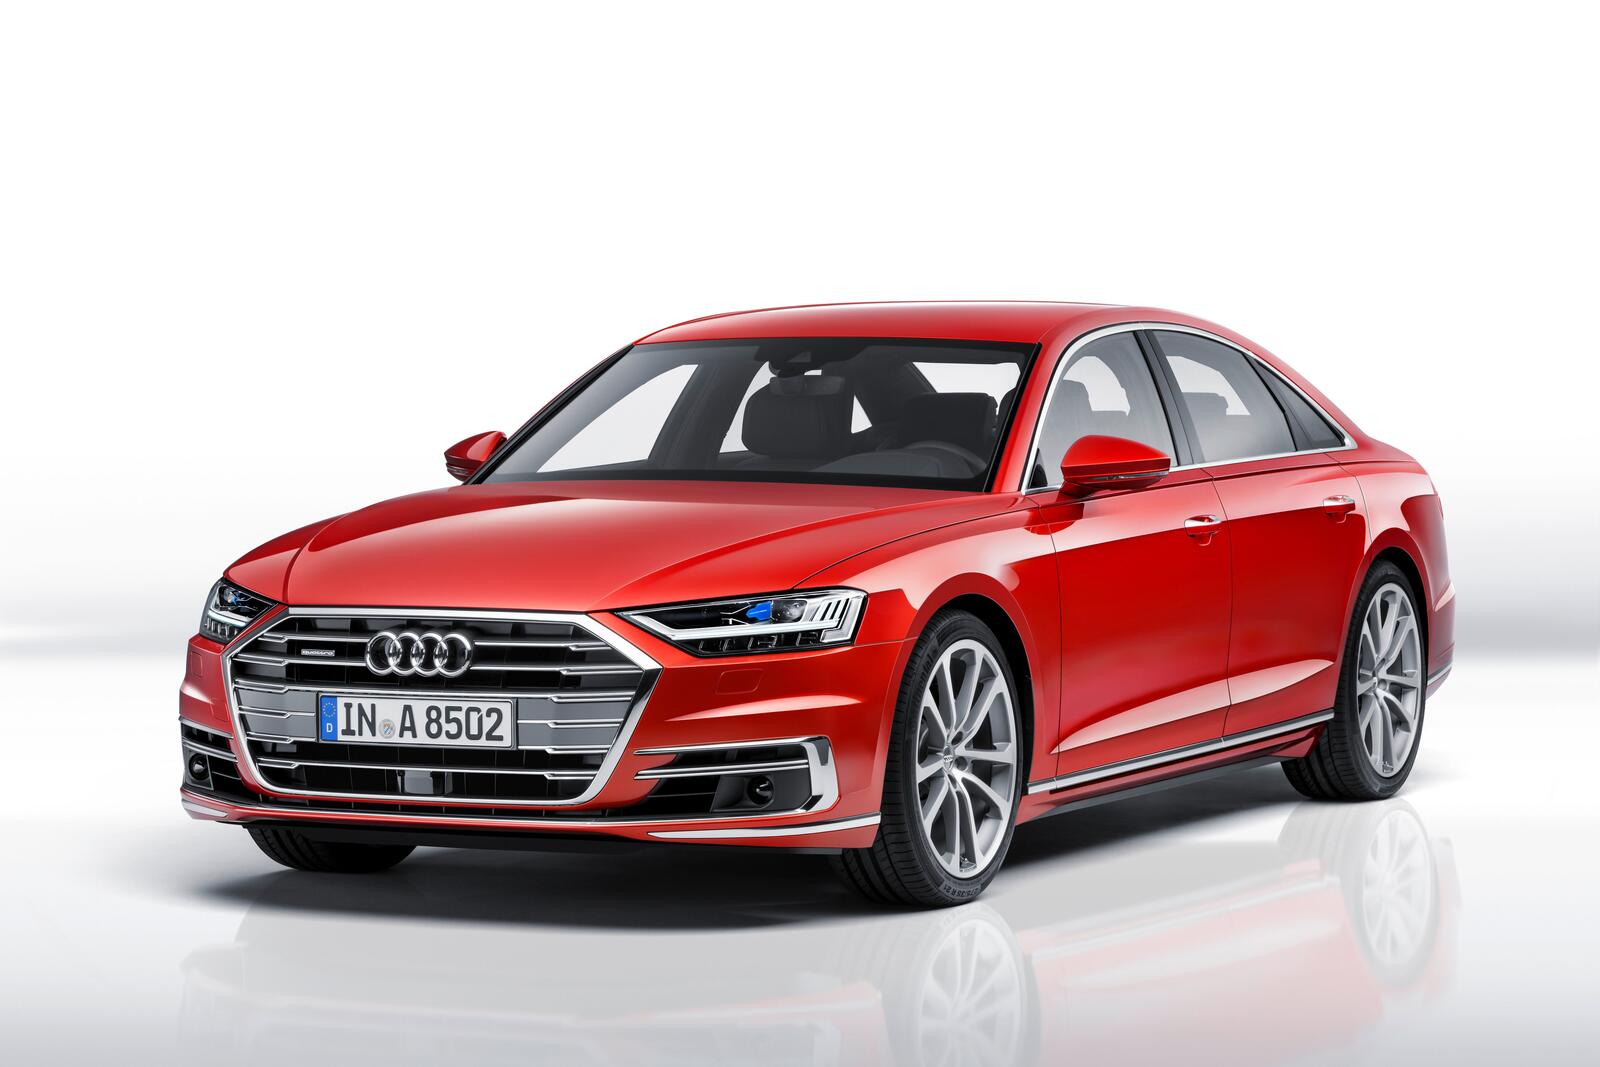 Wallpapers view from front red car Audi A8 on the desktop